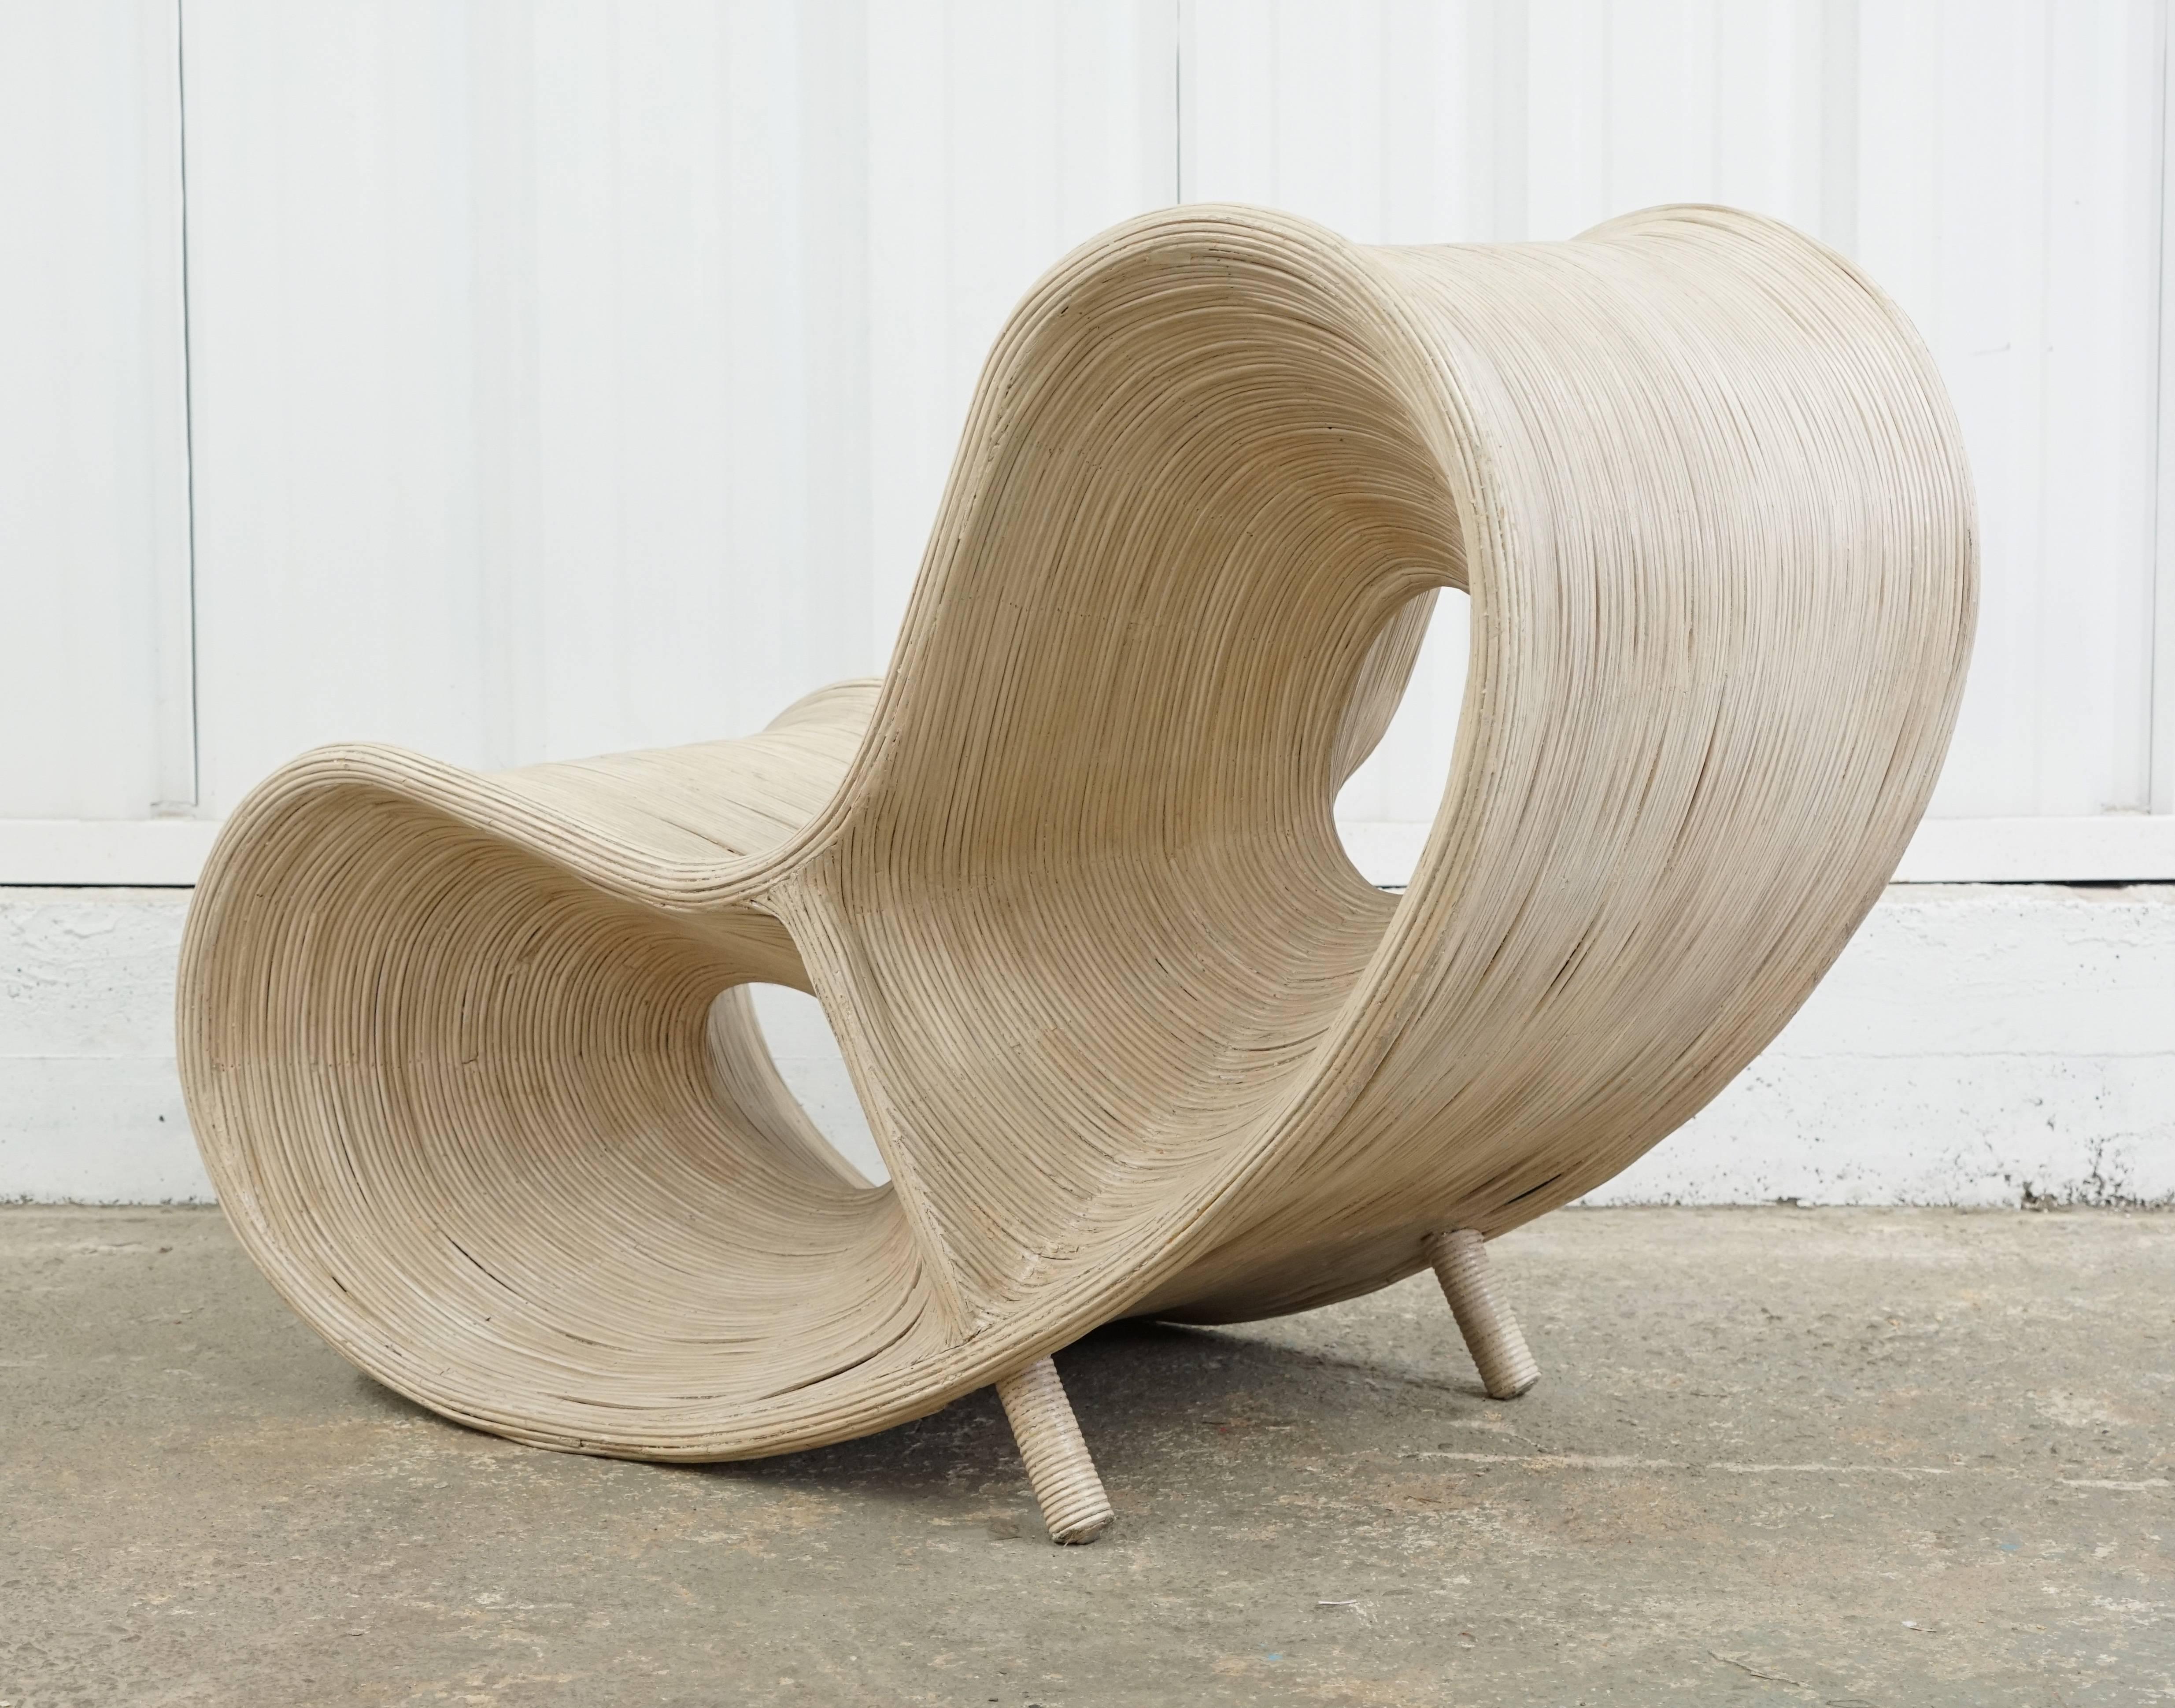 Painted white rattan lounge chair attributed to Ron Arad. Art and sculpture meet design. Finished 360 degrees. Special piece!